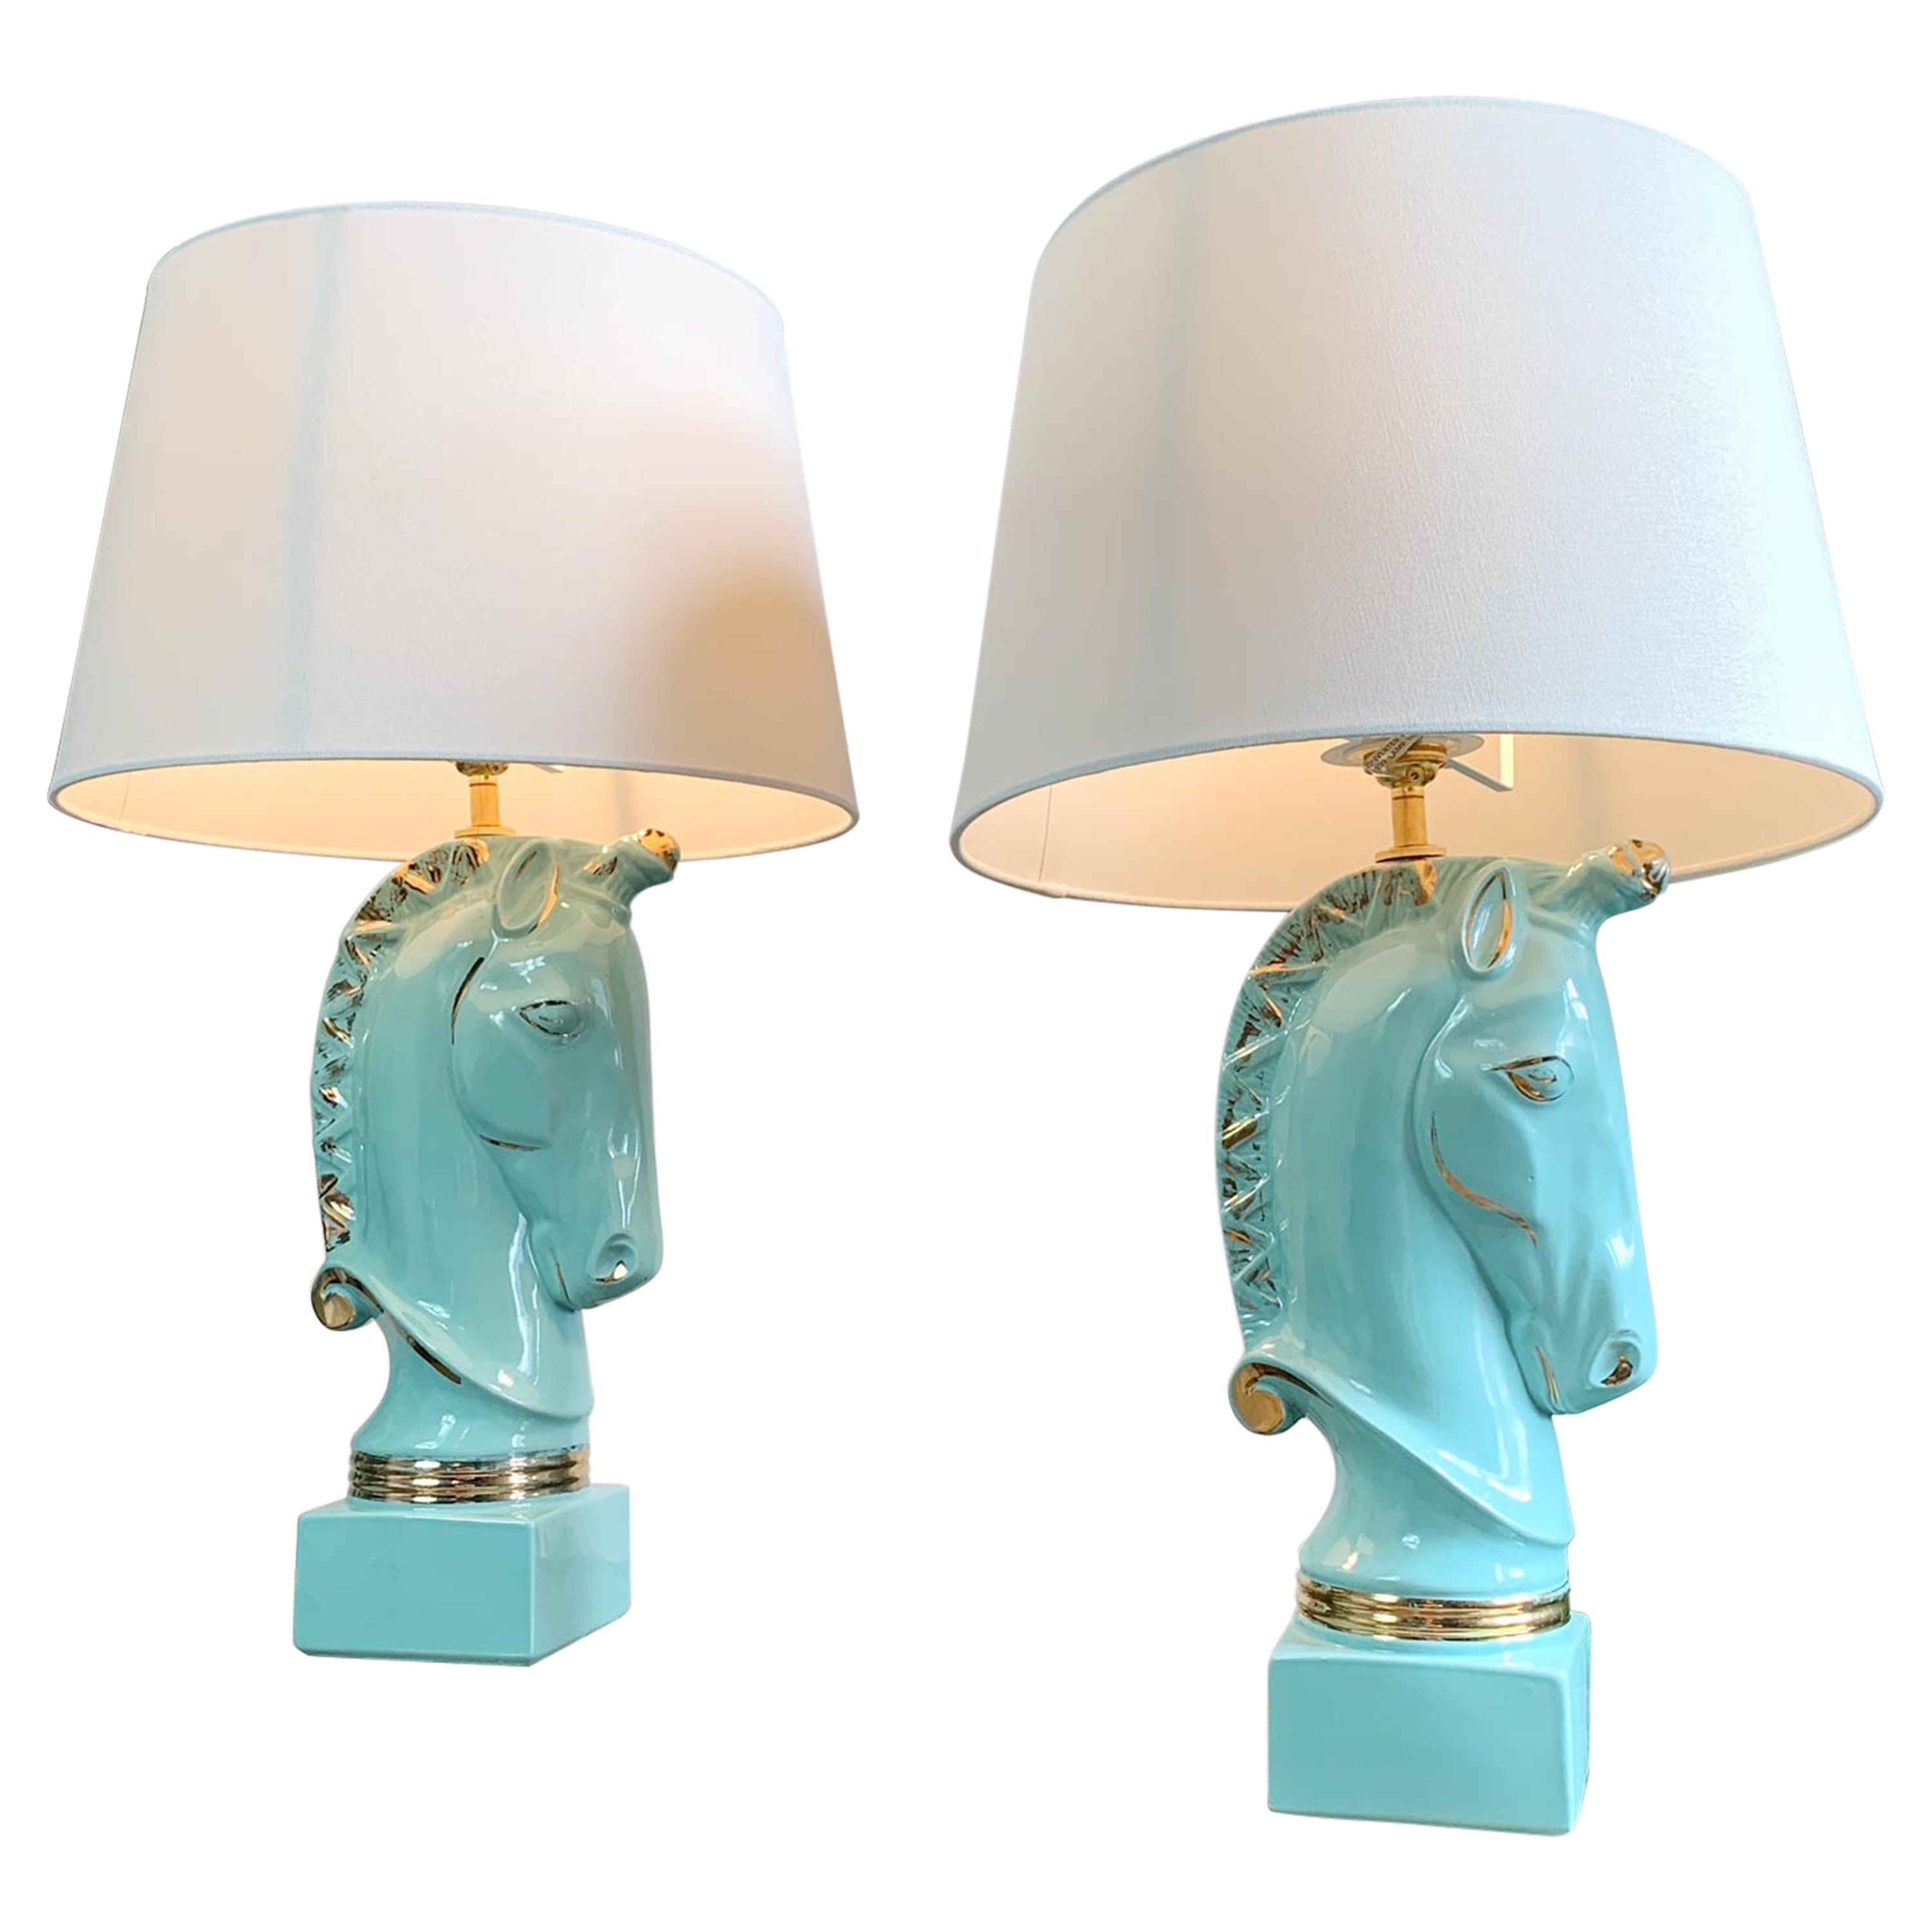 Pair of 1950's Howell Ceramic Unicorn Lamps For Sale at 1stDibs